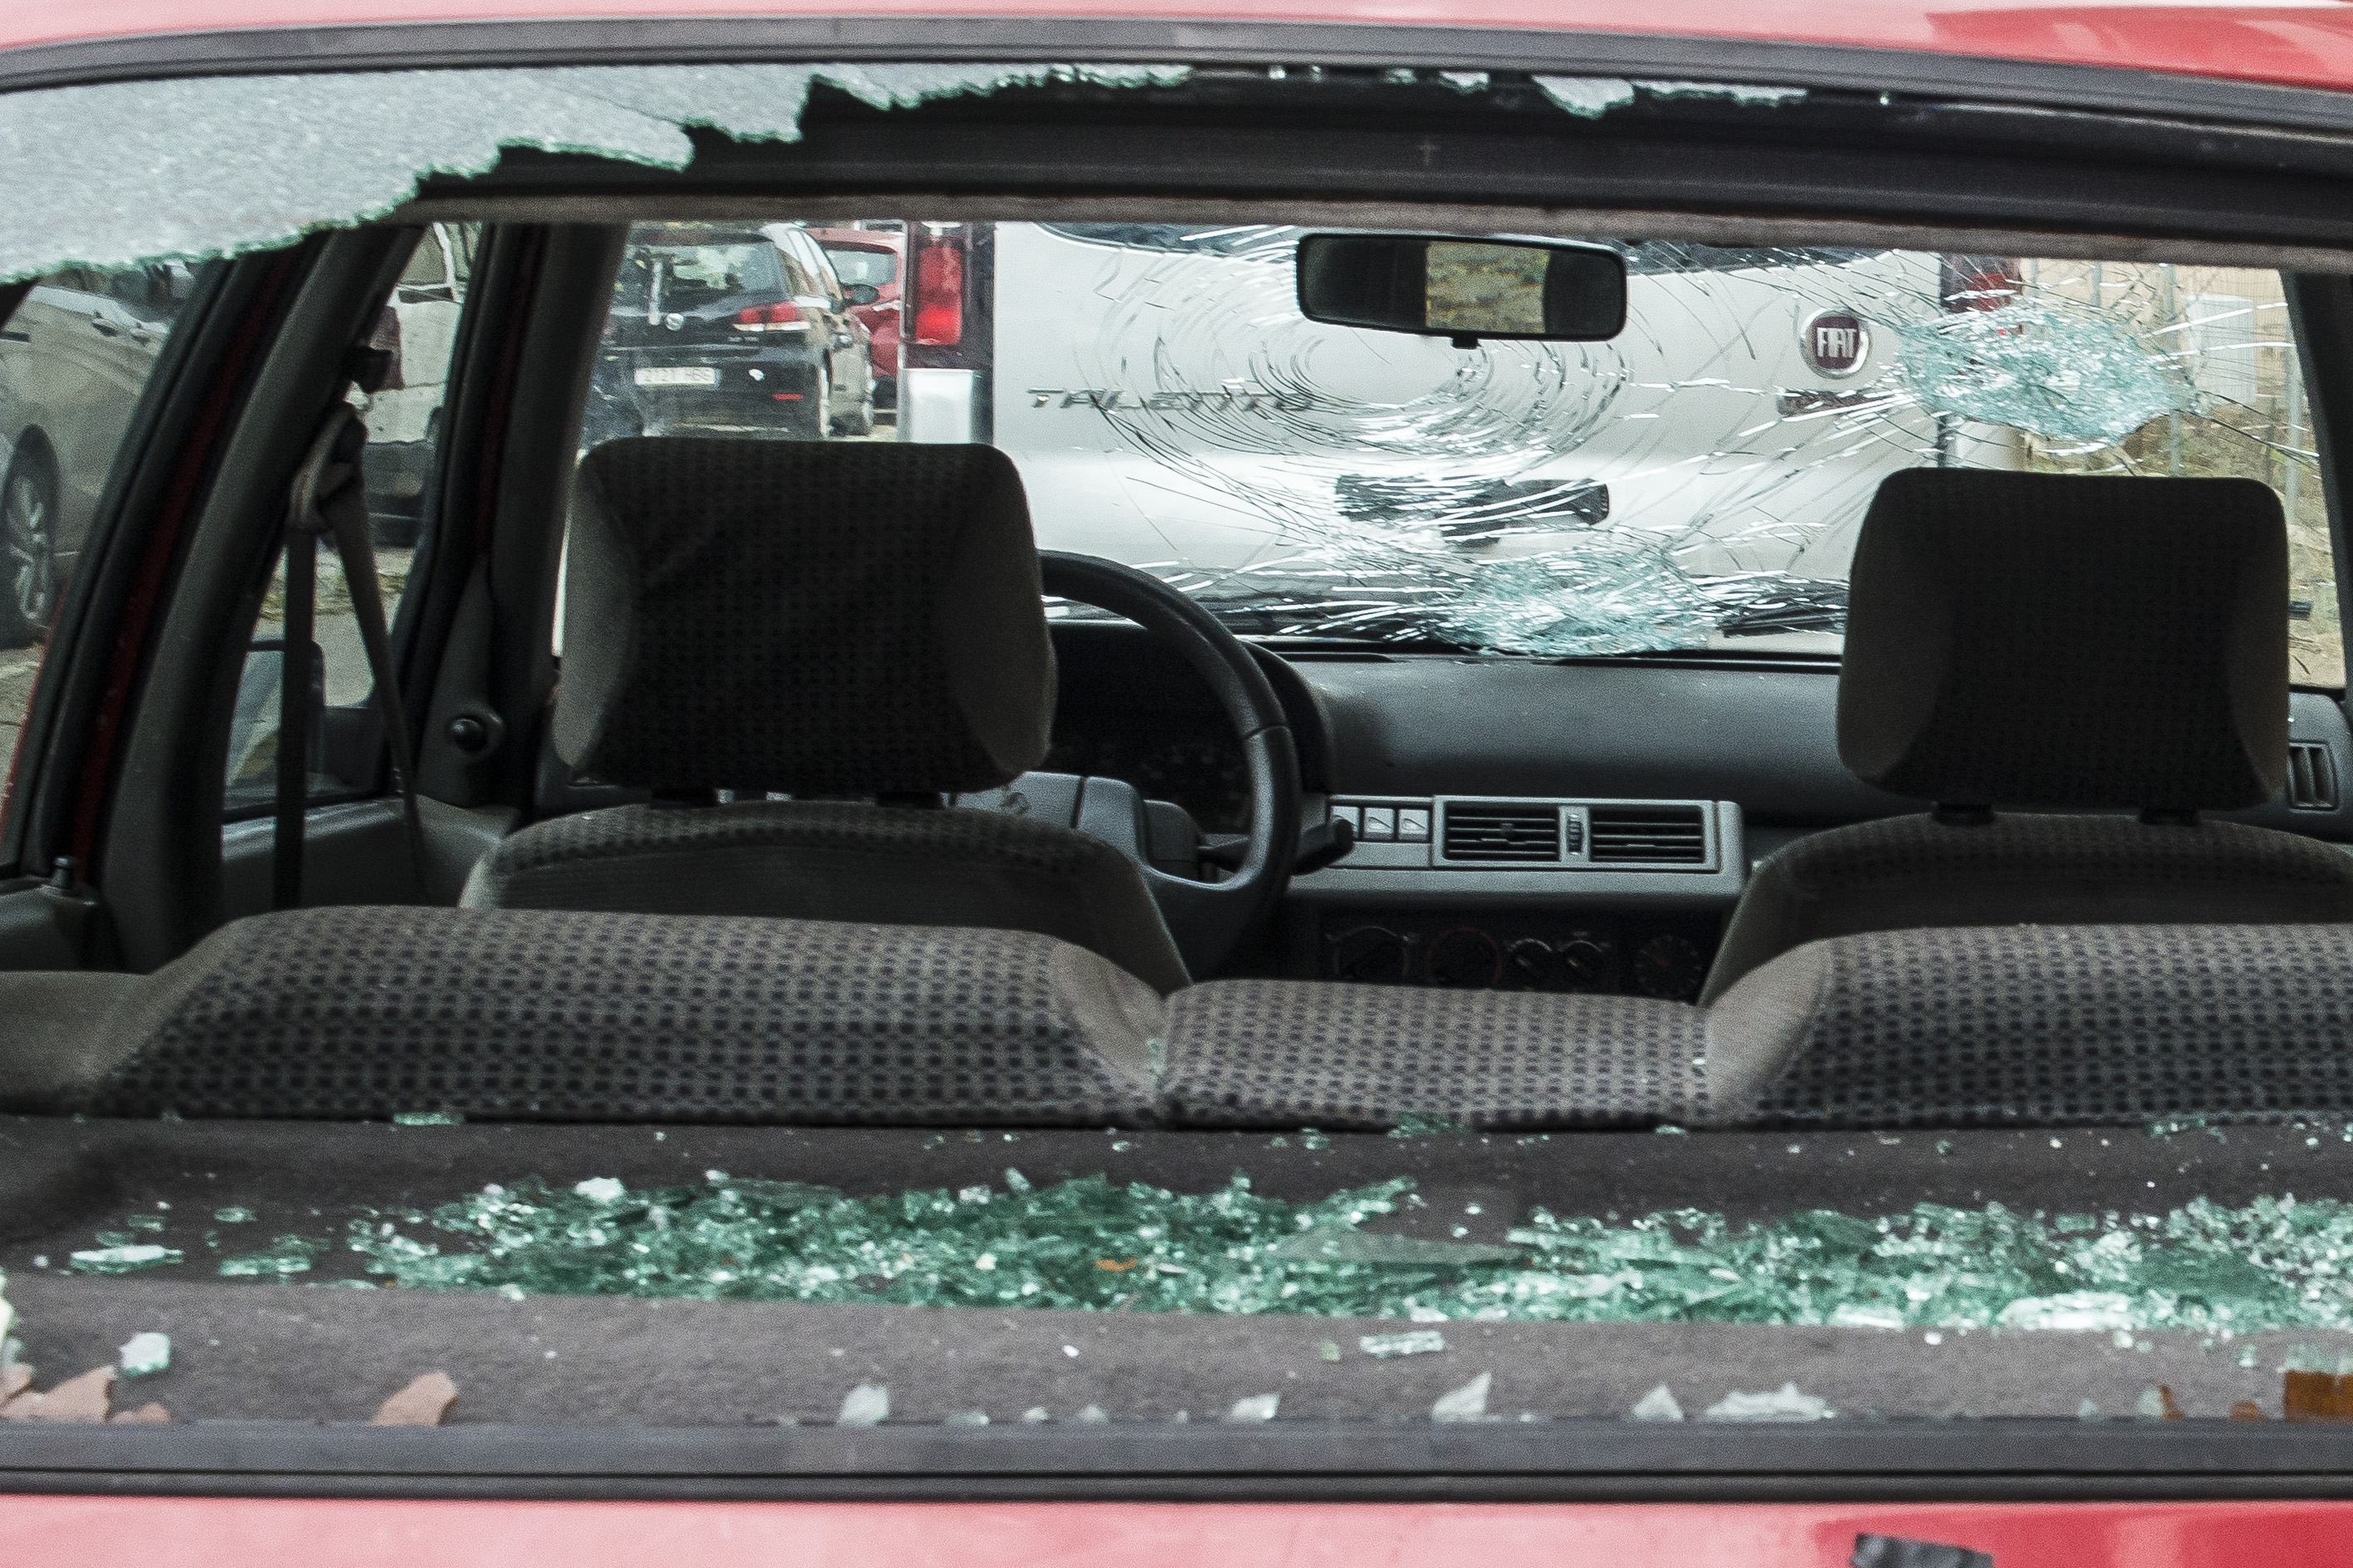 The window of a broken vehicle, as a consequence of the hail storm, on 31 August, 2022 in La Bisbal d'Emporda, Girona, Catalonia, Spain.